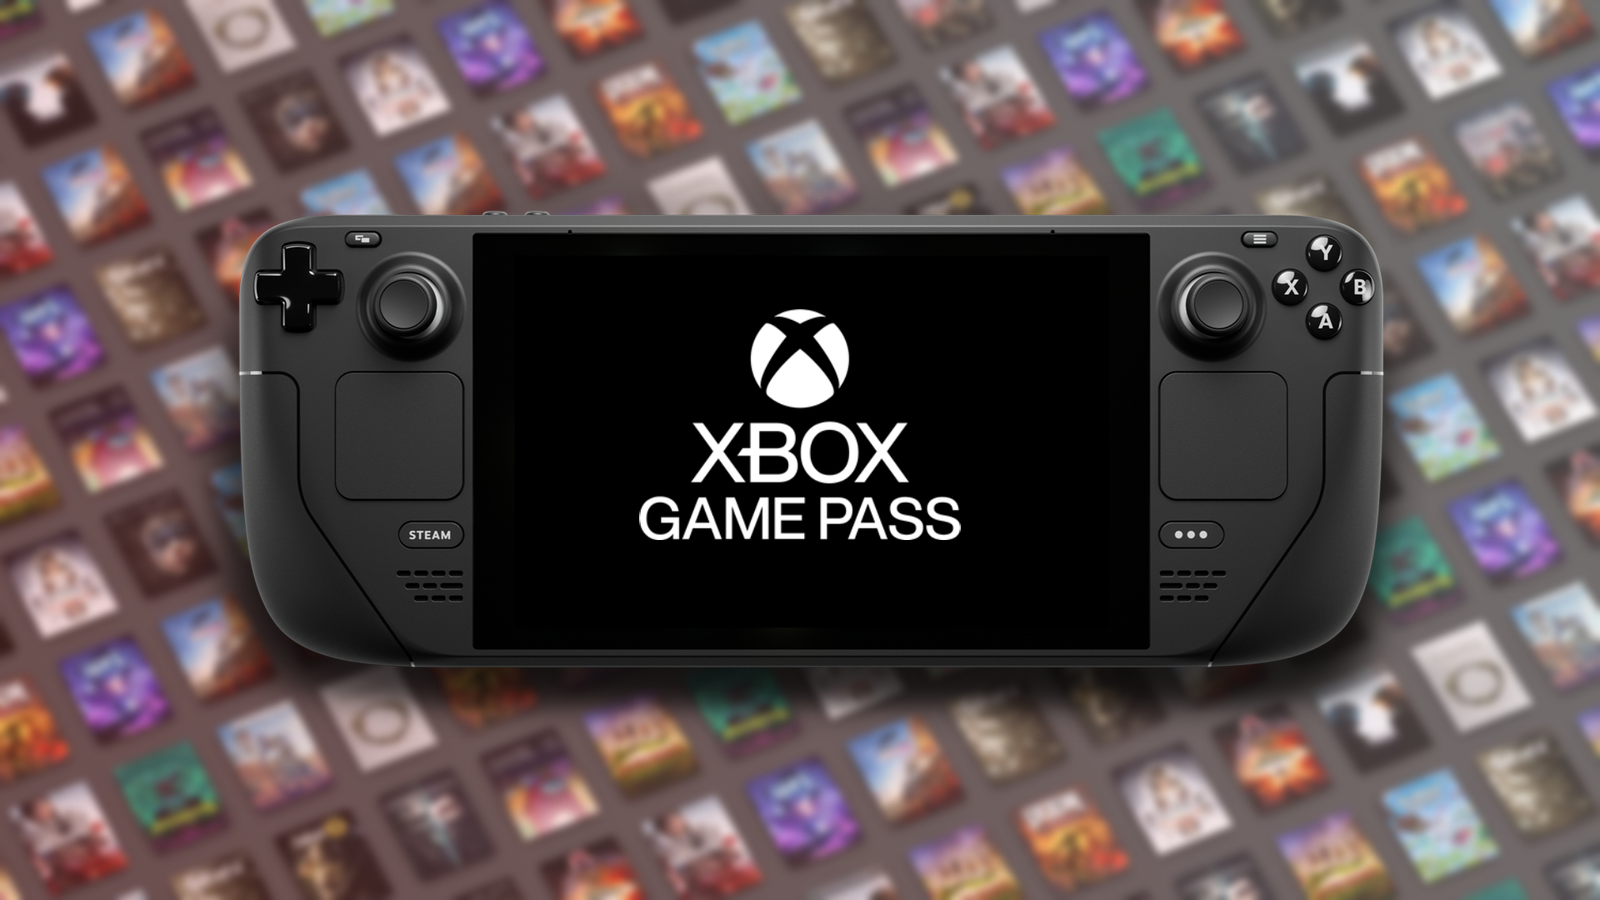 Microsoft Xbox Game Pass for PC Initial Review and Impressions 